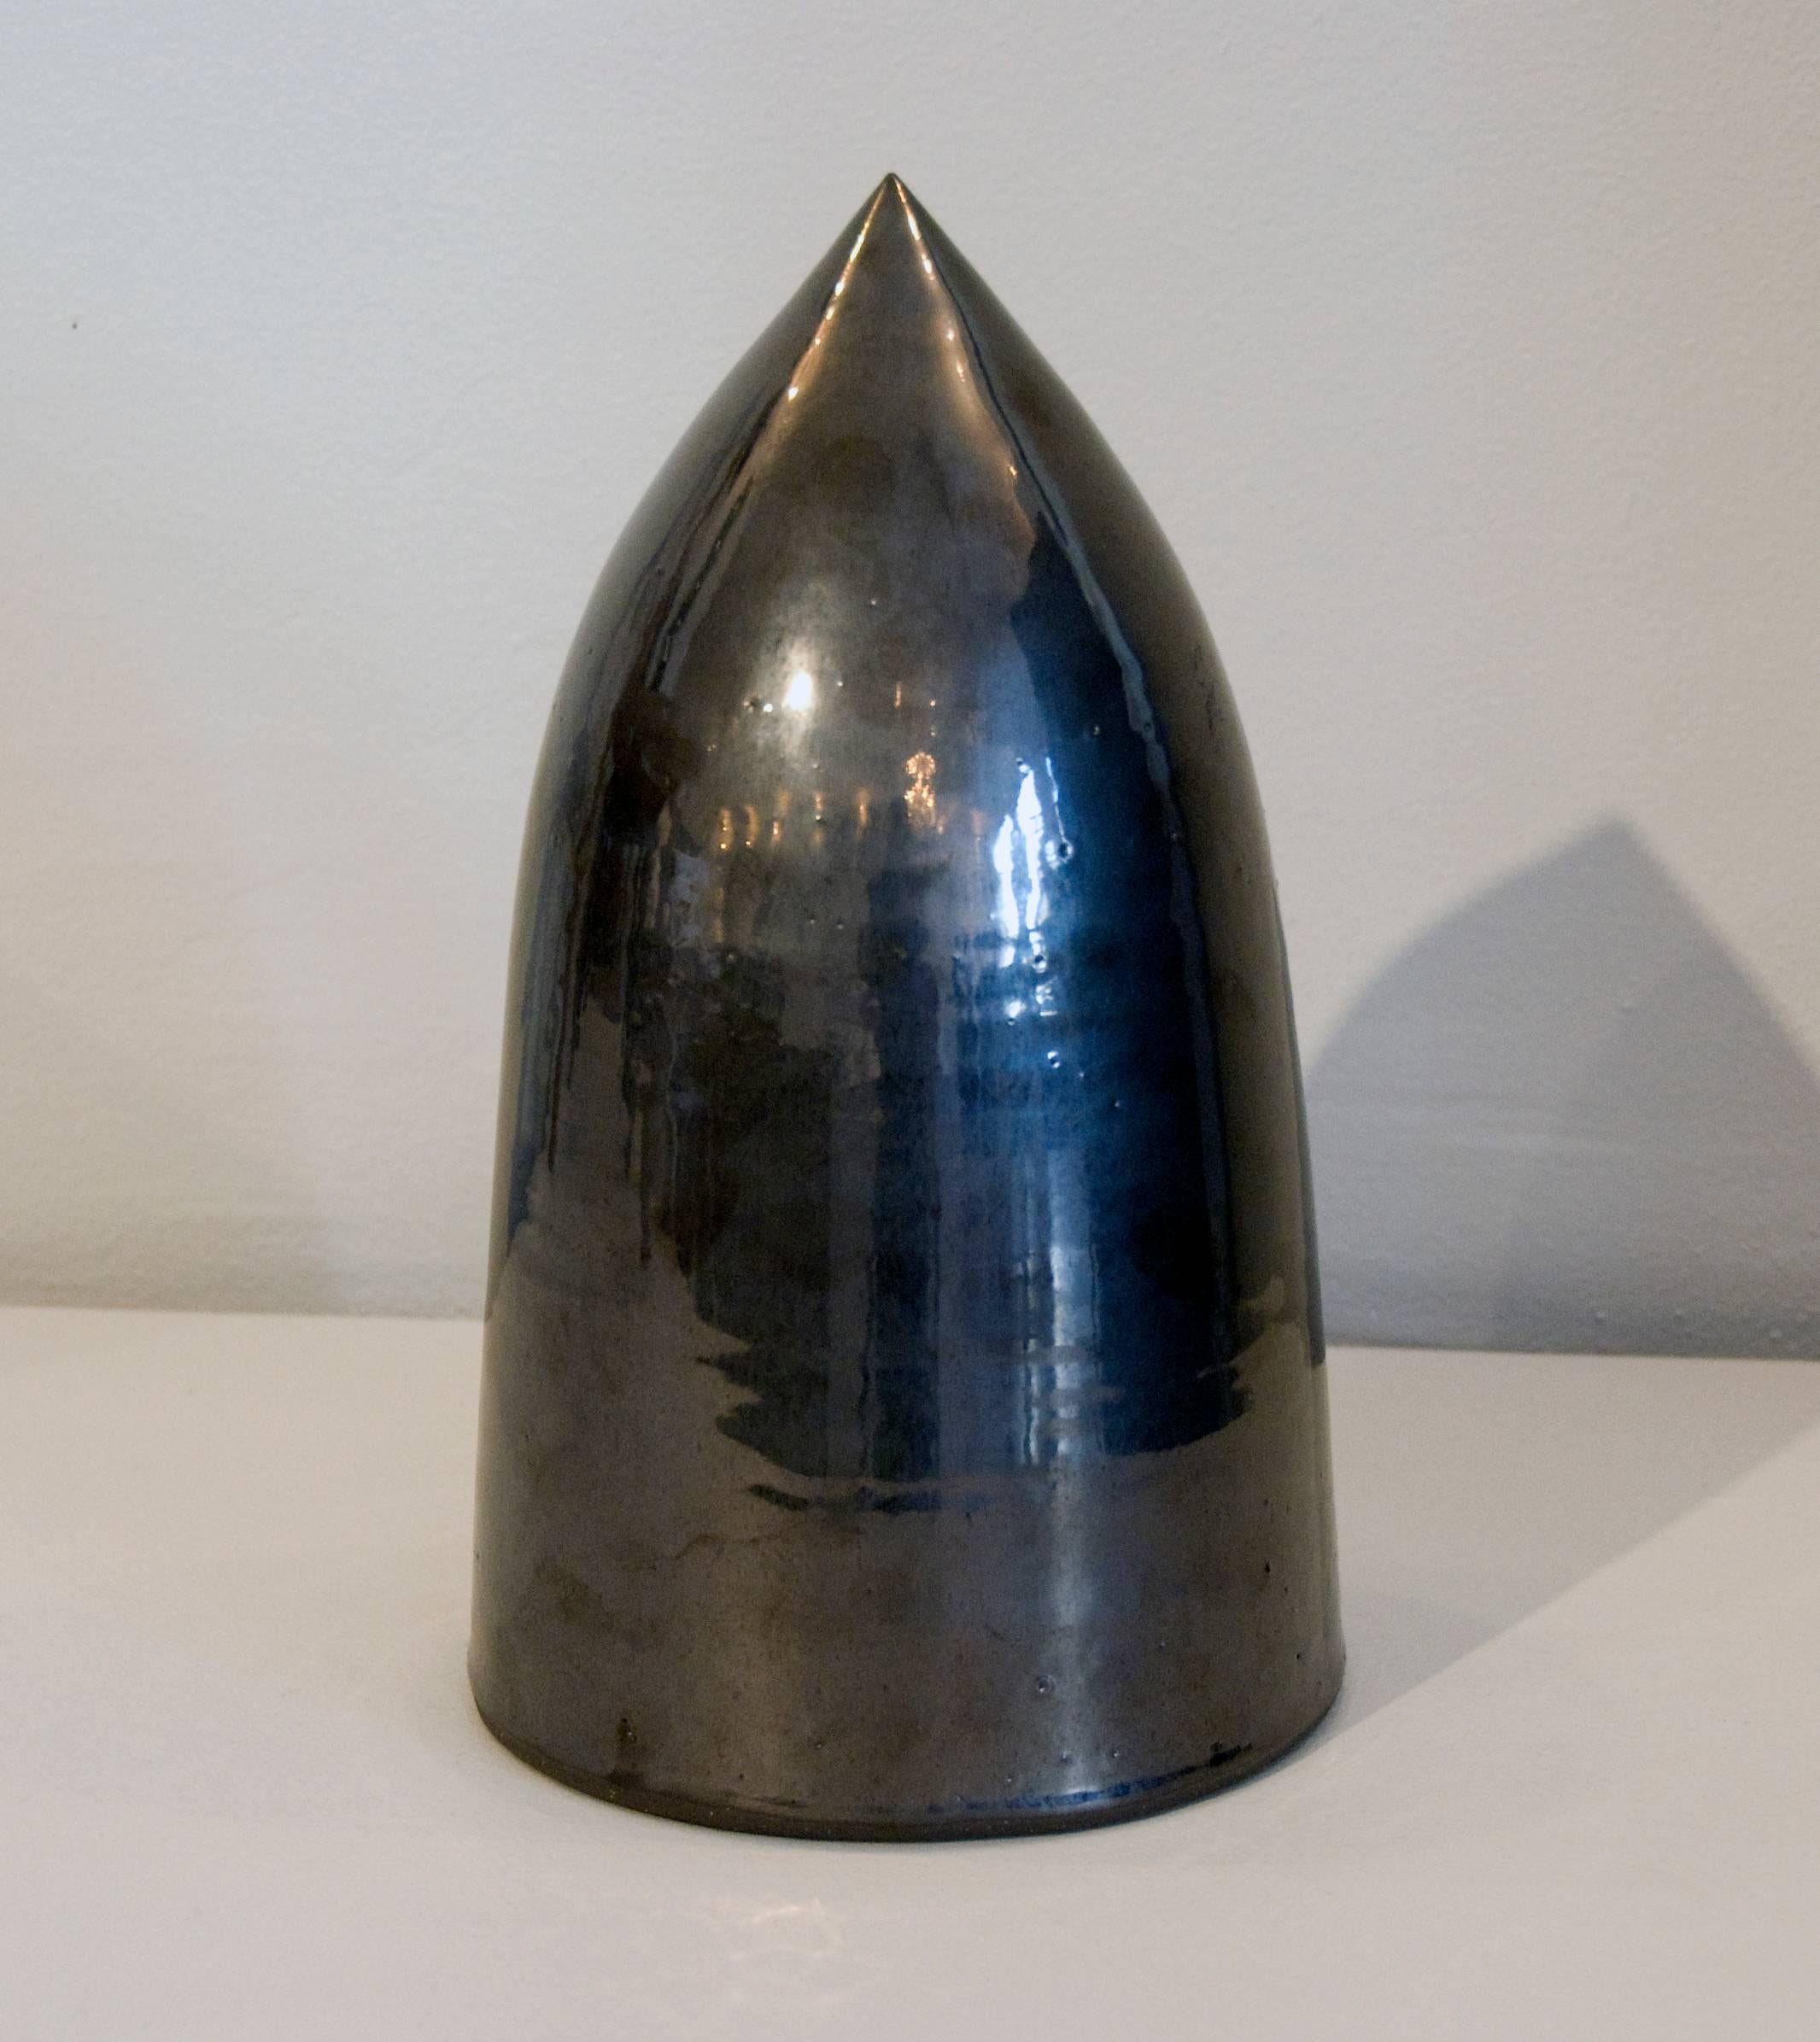 This graphite sculpture is made from high fired stoneware with graphite glaze in 2011 is the work of sculptor James Salaiz.

James is a sculptor and ceramicist based in New York City. His first experience with clay was as a young child in San